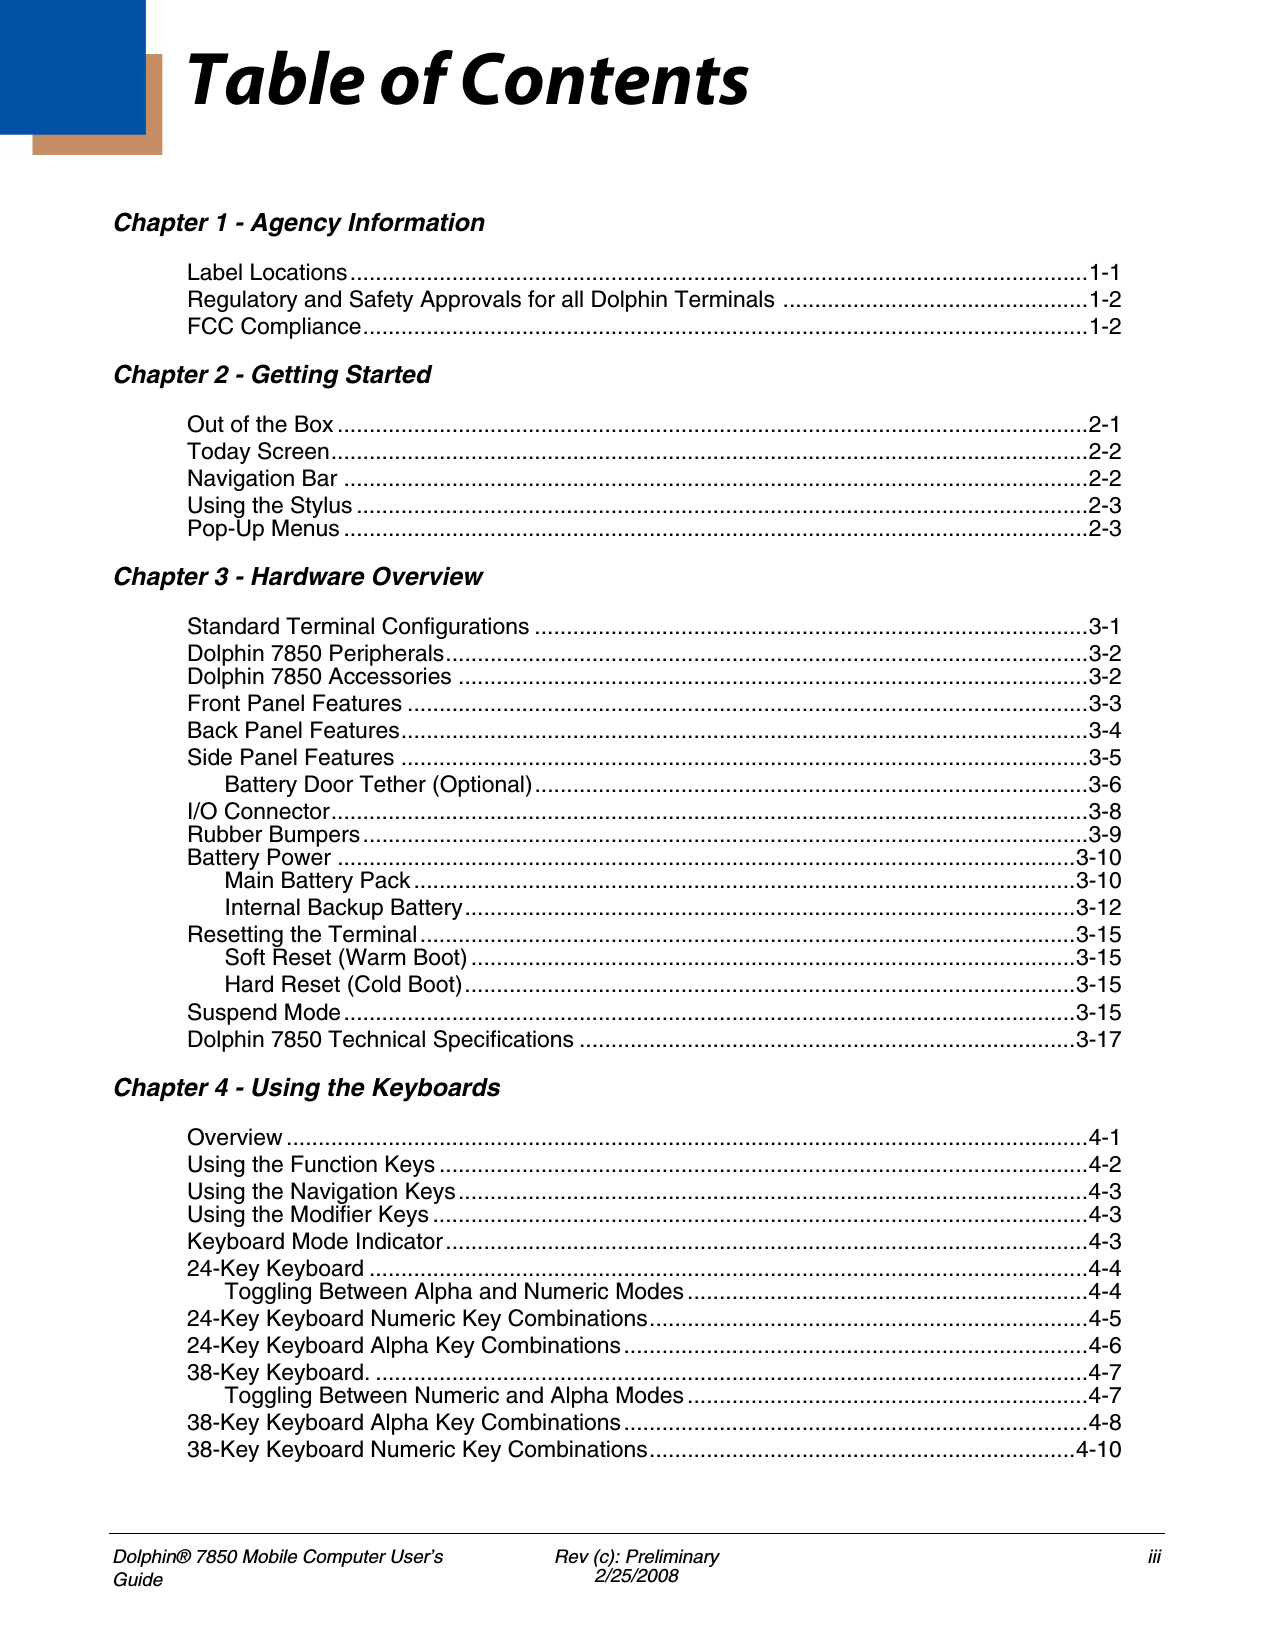 Dolphin® 7850 Mobile Computer User’s GuideRev (c): Preliminary2/25/2008iiiChapter 1 - Agency InformationLabel Locations....................................................................................................................1-1Regulatory and Safety Approvals for all Dolphin Terminals ................................................1-2FCC Compliance..................................................................................................................1-2Chapter 2 - Getting StartedOut of the Box ......................................................................................................................2-1Today Screen.......................................................................................................................2-2Navigation Bar .....................................................................................................................2-2Using the Stylus ...................................................................................................................2-3Pop-Up Menus .....................................................................................................................2-3Chapter 3 - Hardware OverviewStandard Terminal Configurations .......................................................................................3-1Dolphin 7850 Peripherals.....................................................................................................3-2Dolphin 7850 Accessories ...................................................................................................3-2Front Panel Features ...........................................................................................................3-3Back Panel Features............................................................................................................3-4Side Panel Features ............................................................................................................3-5Battery Door Tether (Optional).......................................................................................3-6I/O Connector.......................................................................................................................3-8Rubber Bumpers..................................................................................................................3-9Battery Power ....................................................................................................................3-10Main Battery Pack ........................................................................................................3-10Internal Backup Battery................................................................................................3-12Resetting the Terminal.......................................................................................................3-15Soft Reset (Warm Boot) ...............................................................................................3-15Hard Reset (Cold Boot)................................................................................................3-15Suspend Mode...................................................................................................................3-15Dolphin 7850 Technical Specifications ..............................................................................3-17Chapter 4 - Using the KeyboardsOverview ..............................................................................................................................4-1Using the Function Keys ......................................................................................................4-2Using the Navigation Keys...................................................................................................4-3Using the Modifier Keys .......................................................................................................4-3Keyboard Mode Indicator.....................................................................................................4-324-Key Keyboard .................................................................................................................4-4Toggling Between Alpha and Numeric Modes ...............................................................4-424-Key Keyboard Numeric Key Combinations.....................................................................4-524-Key Keyboard Alpha Key Combinations.........................................................................4-638-Key Keyboard. ................................................................................................................4-7Toggling Between Numeric and Alpha Modes ...............................................................4-738-Key Keyboard Alpha Key Combinations.........................................................................4-838-Key Keyboard Numeric Key Combinations...................................................................4-10Table of Contents